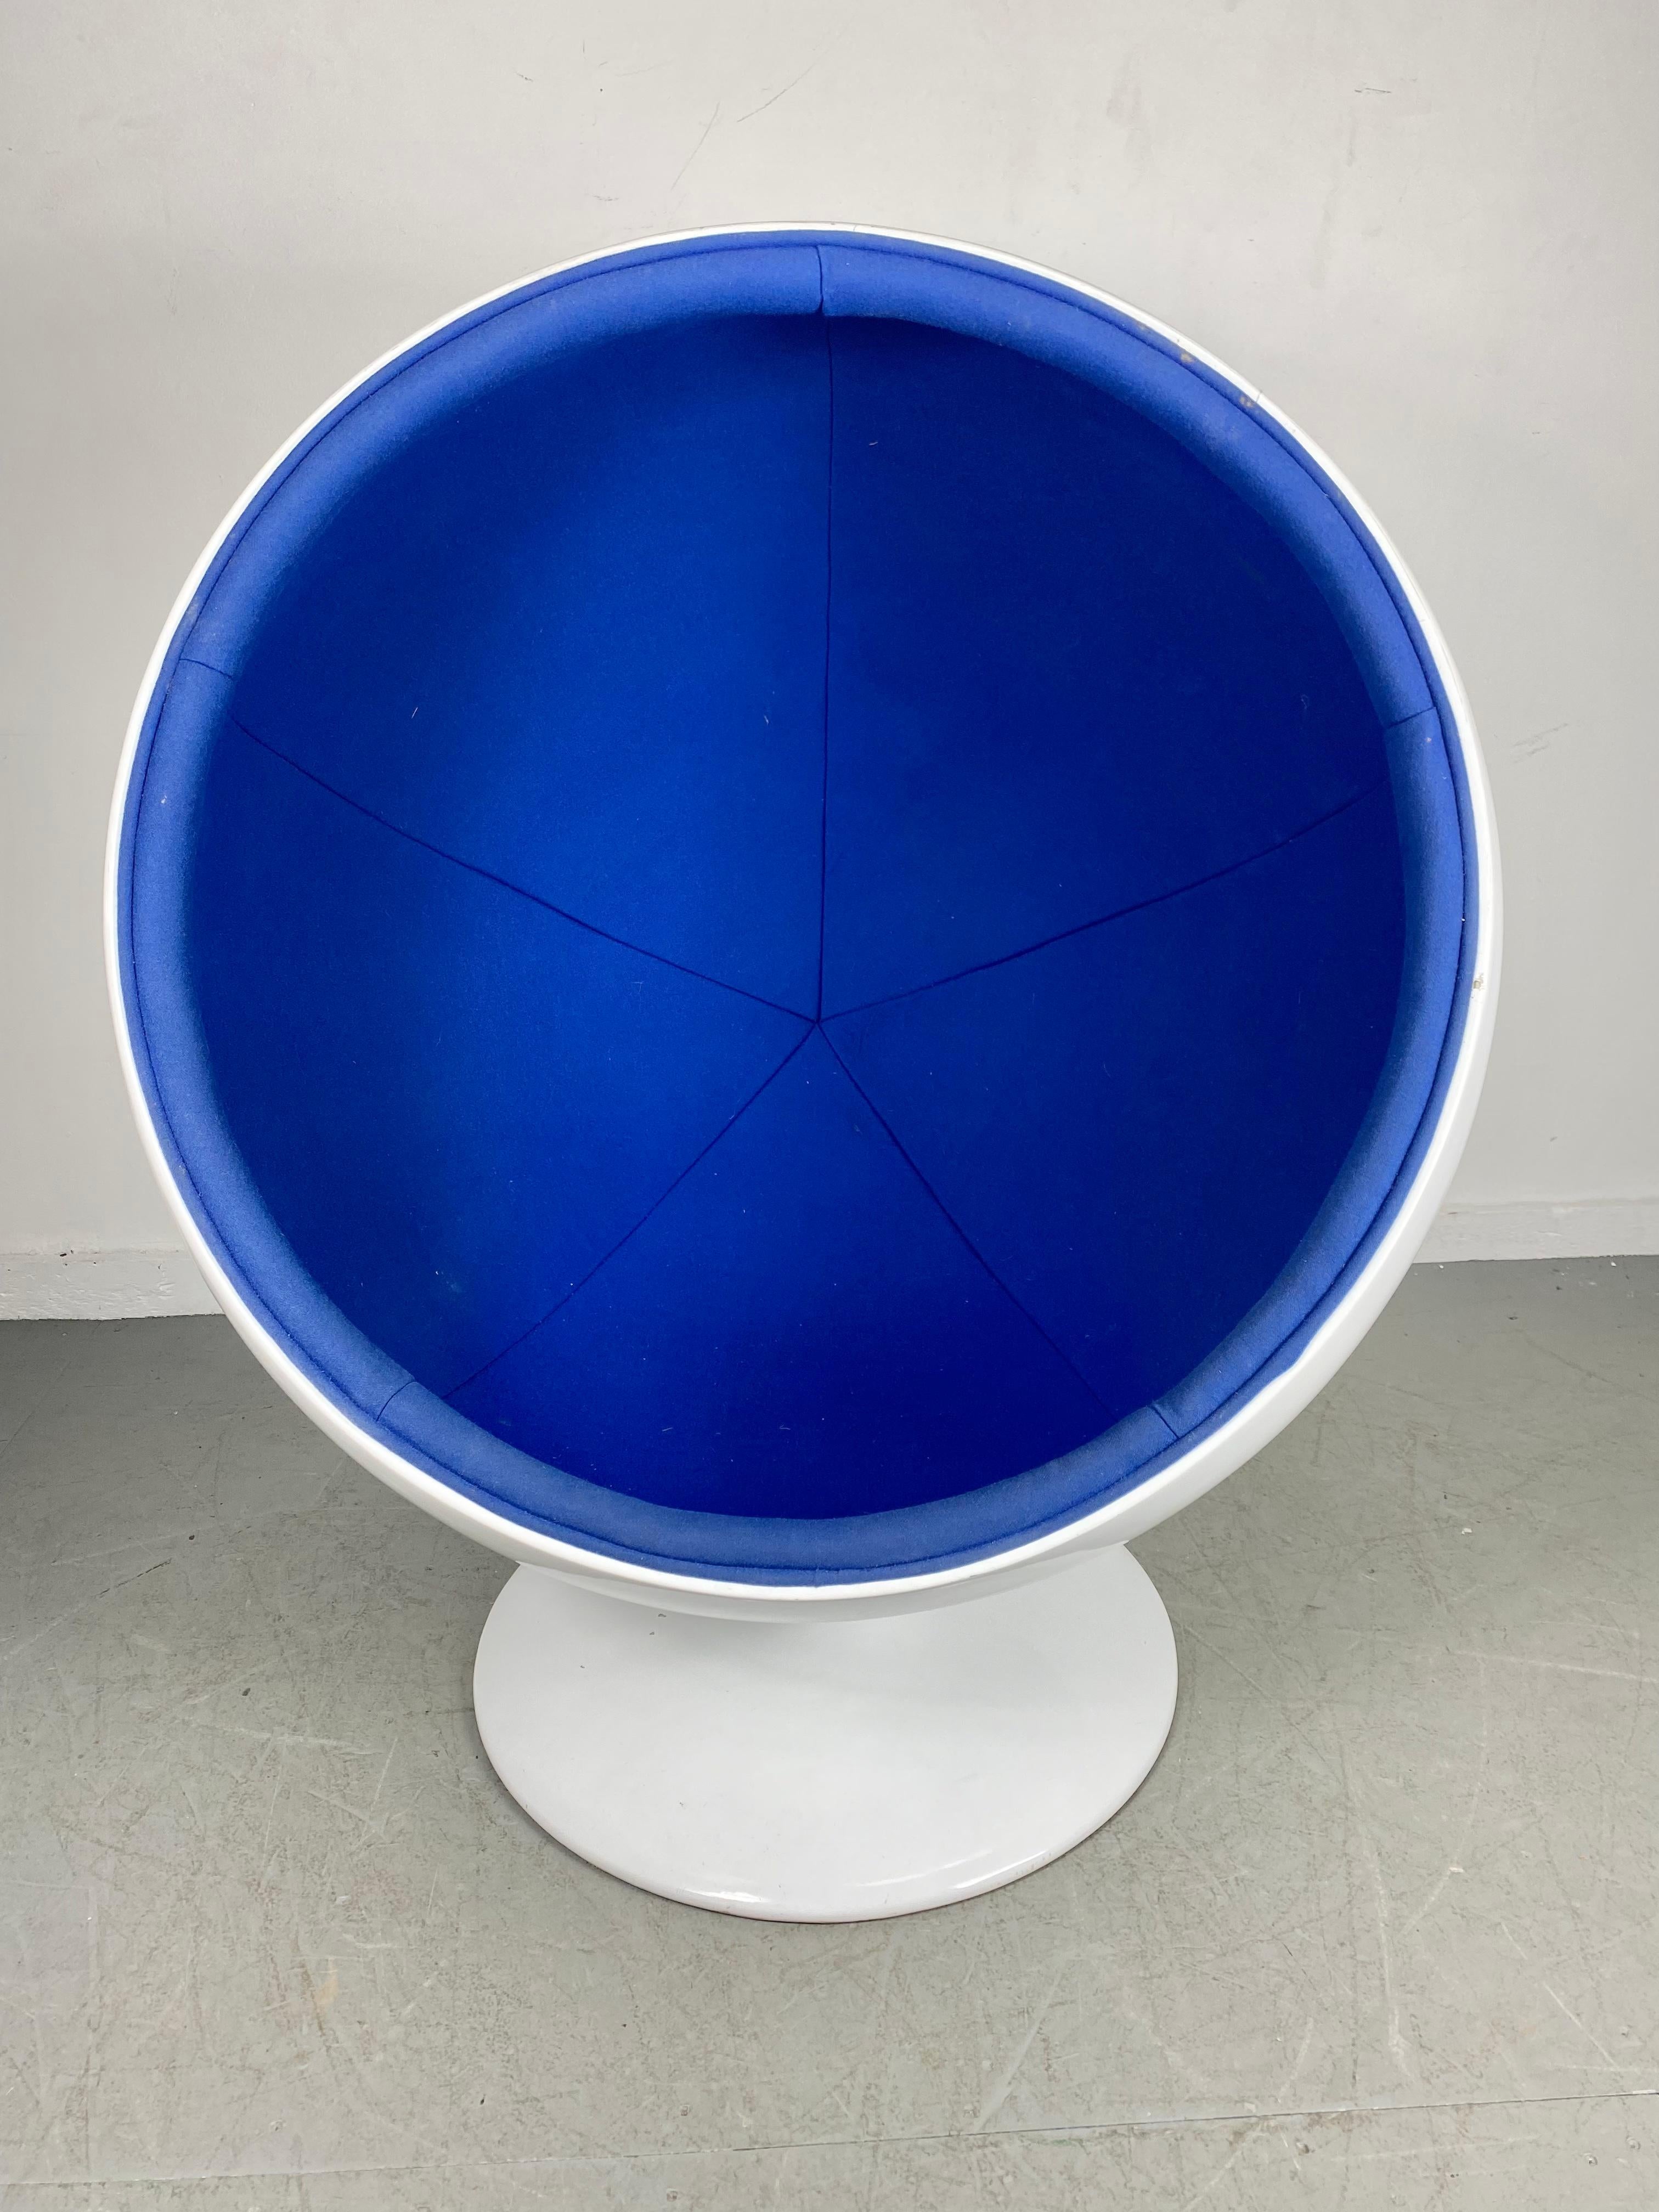 Space Age Contemporary fiberglass ball / globe chair style of Eero Aarino. Older version, not a cheap reproduction, heavy fiberglass construction, beautiful royal blue wool fabric interior, 360% swivel. Minor edge chip (see photo) Hand delivery